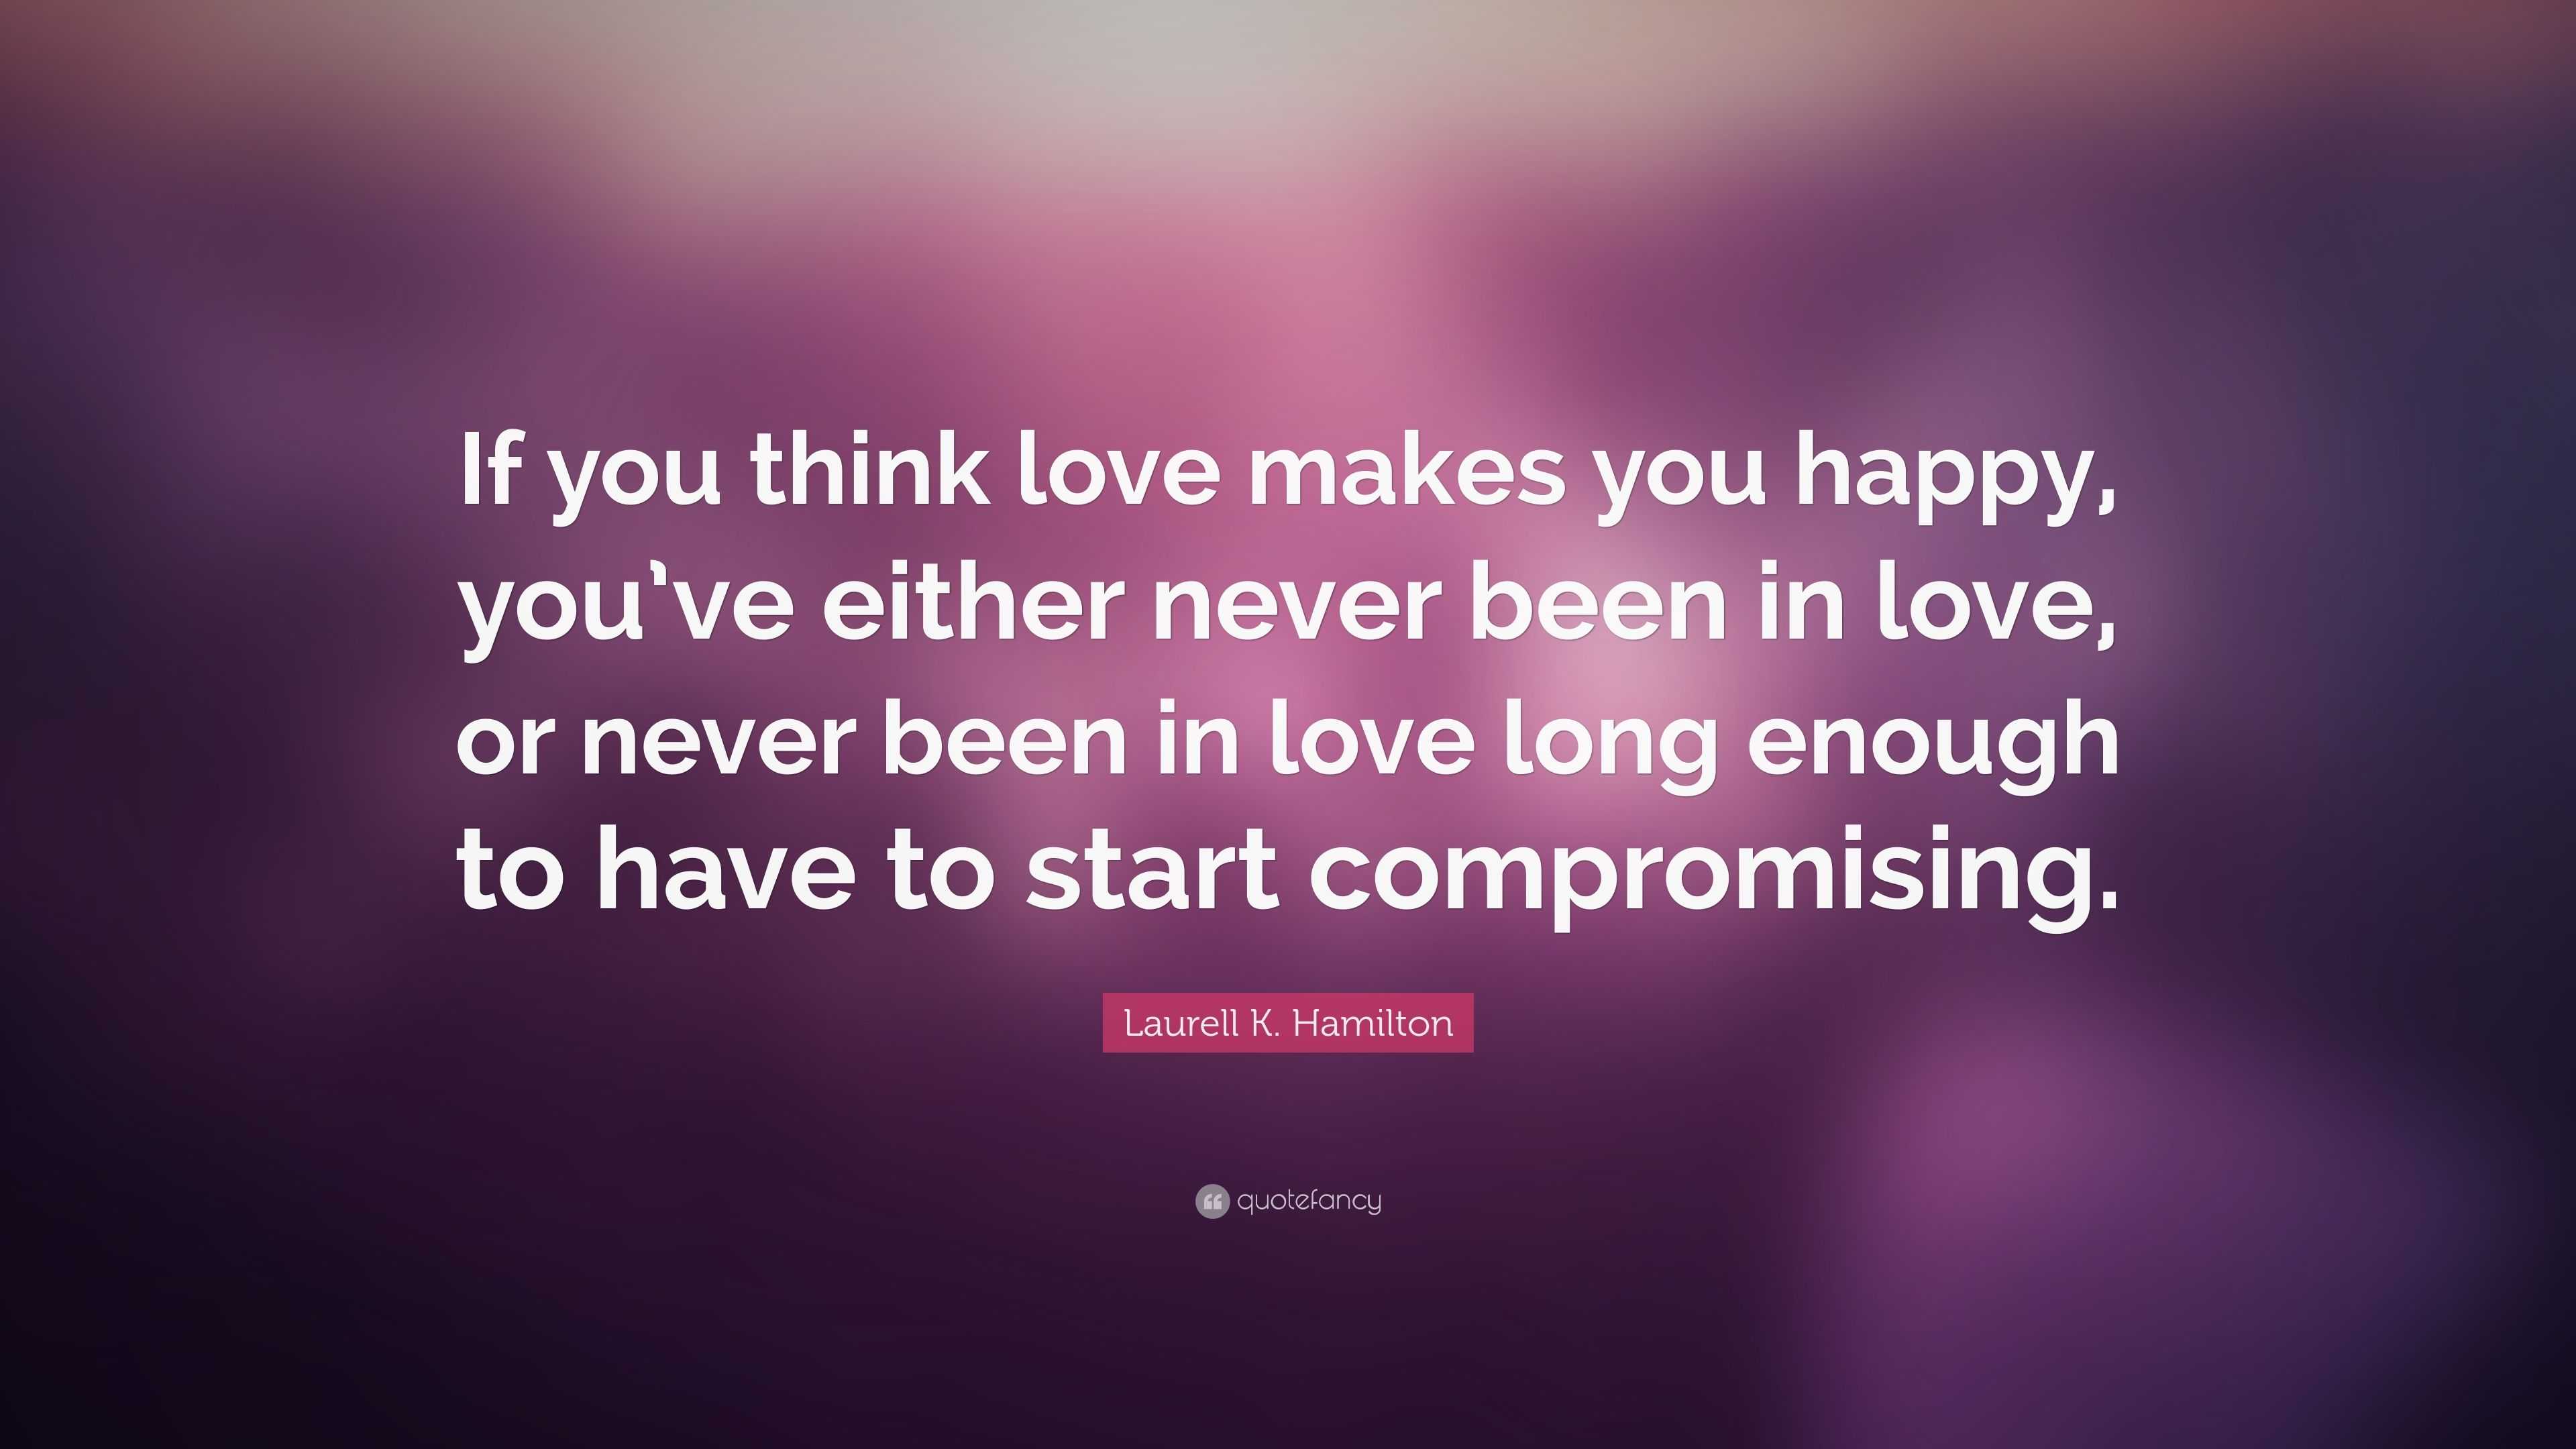 Laurell K Hamilton Quote “If you think love makes you happy you